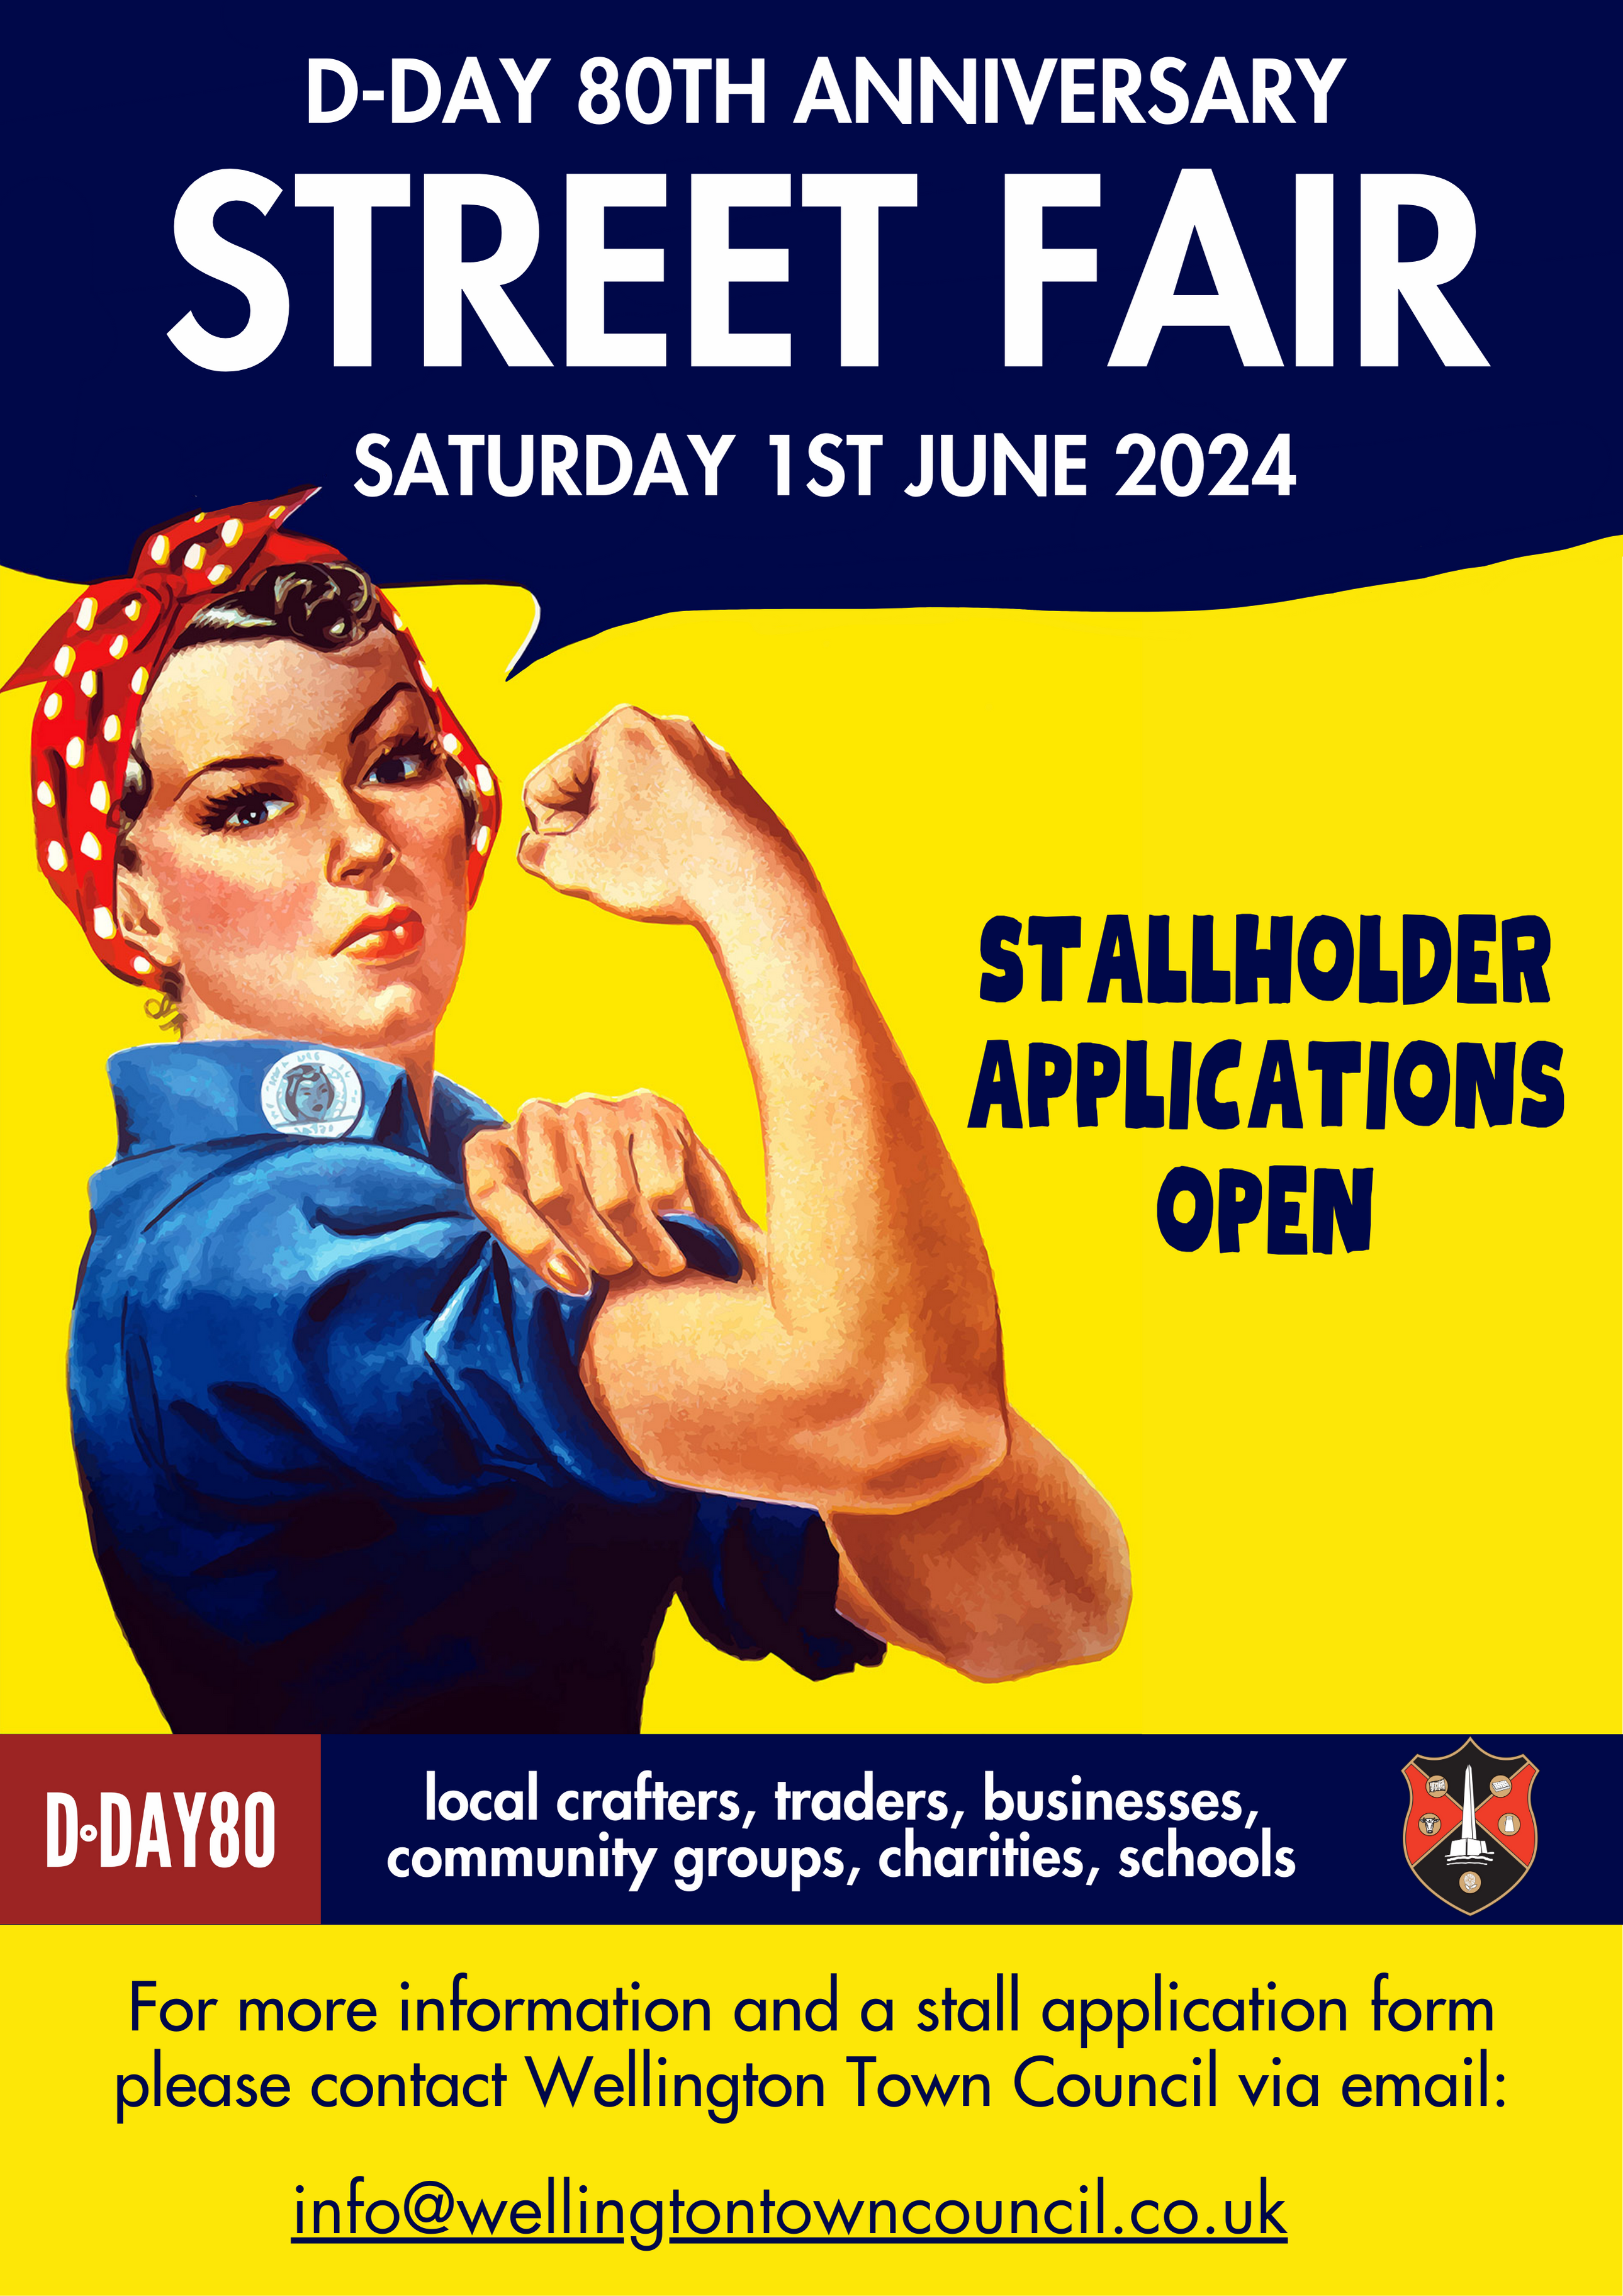 D-Day 80th Anniversary Street Fair, Saturday 1st June Stallholder Applications Open local crafters, traders, businesses, community groups, charities, schools for more information and a stall application form please contact Wellington Town Council via email: info@wellingtontowncouncil.co.uk